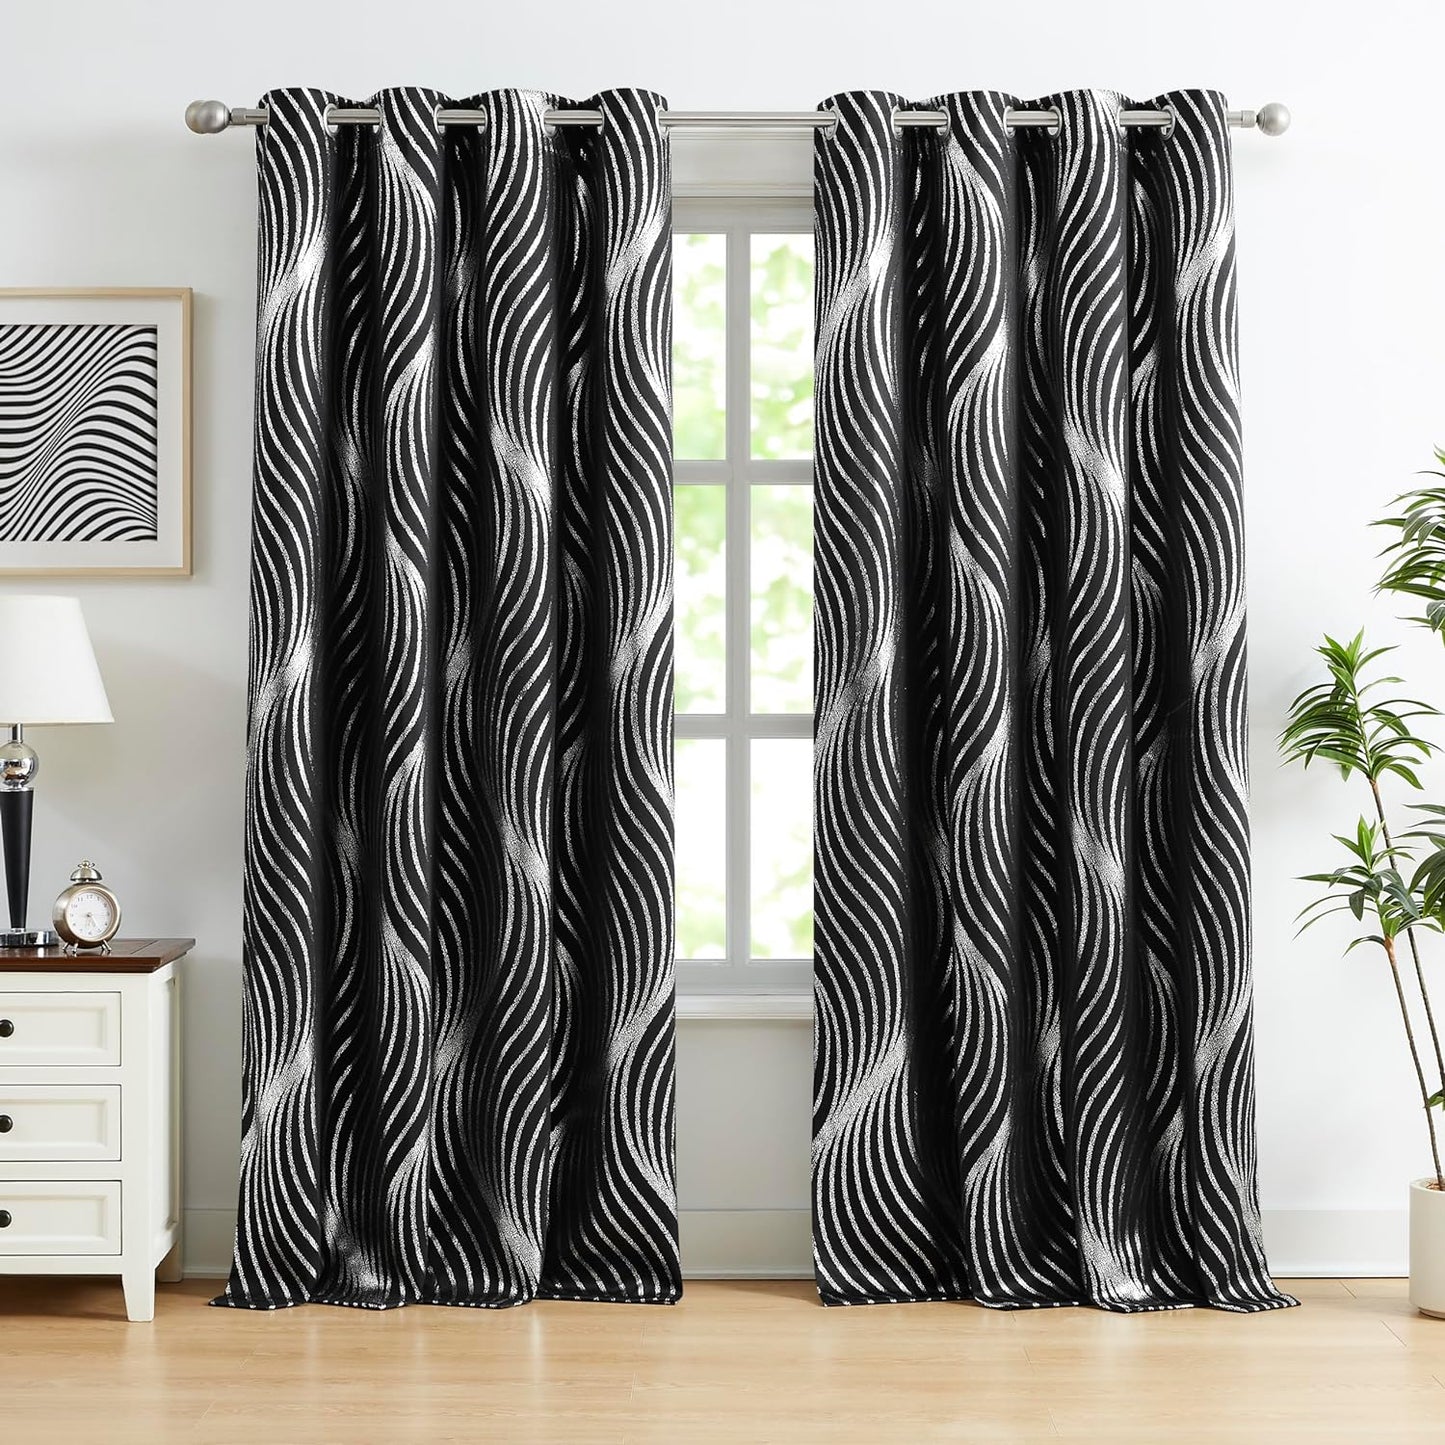 Xwincel Full Blackout Curtains with Silver Metallic Wave Print,84 Inches Long Thermal Insulated Sound Proof Window Treatments for Living Room Bedroom, Grommets Top Design,White,52W X 84L,2 Panel Sets  Xwincel Black 52"X84"X2 